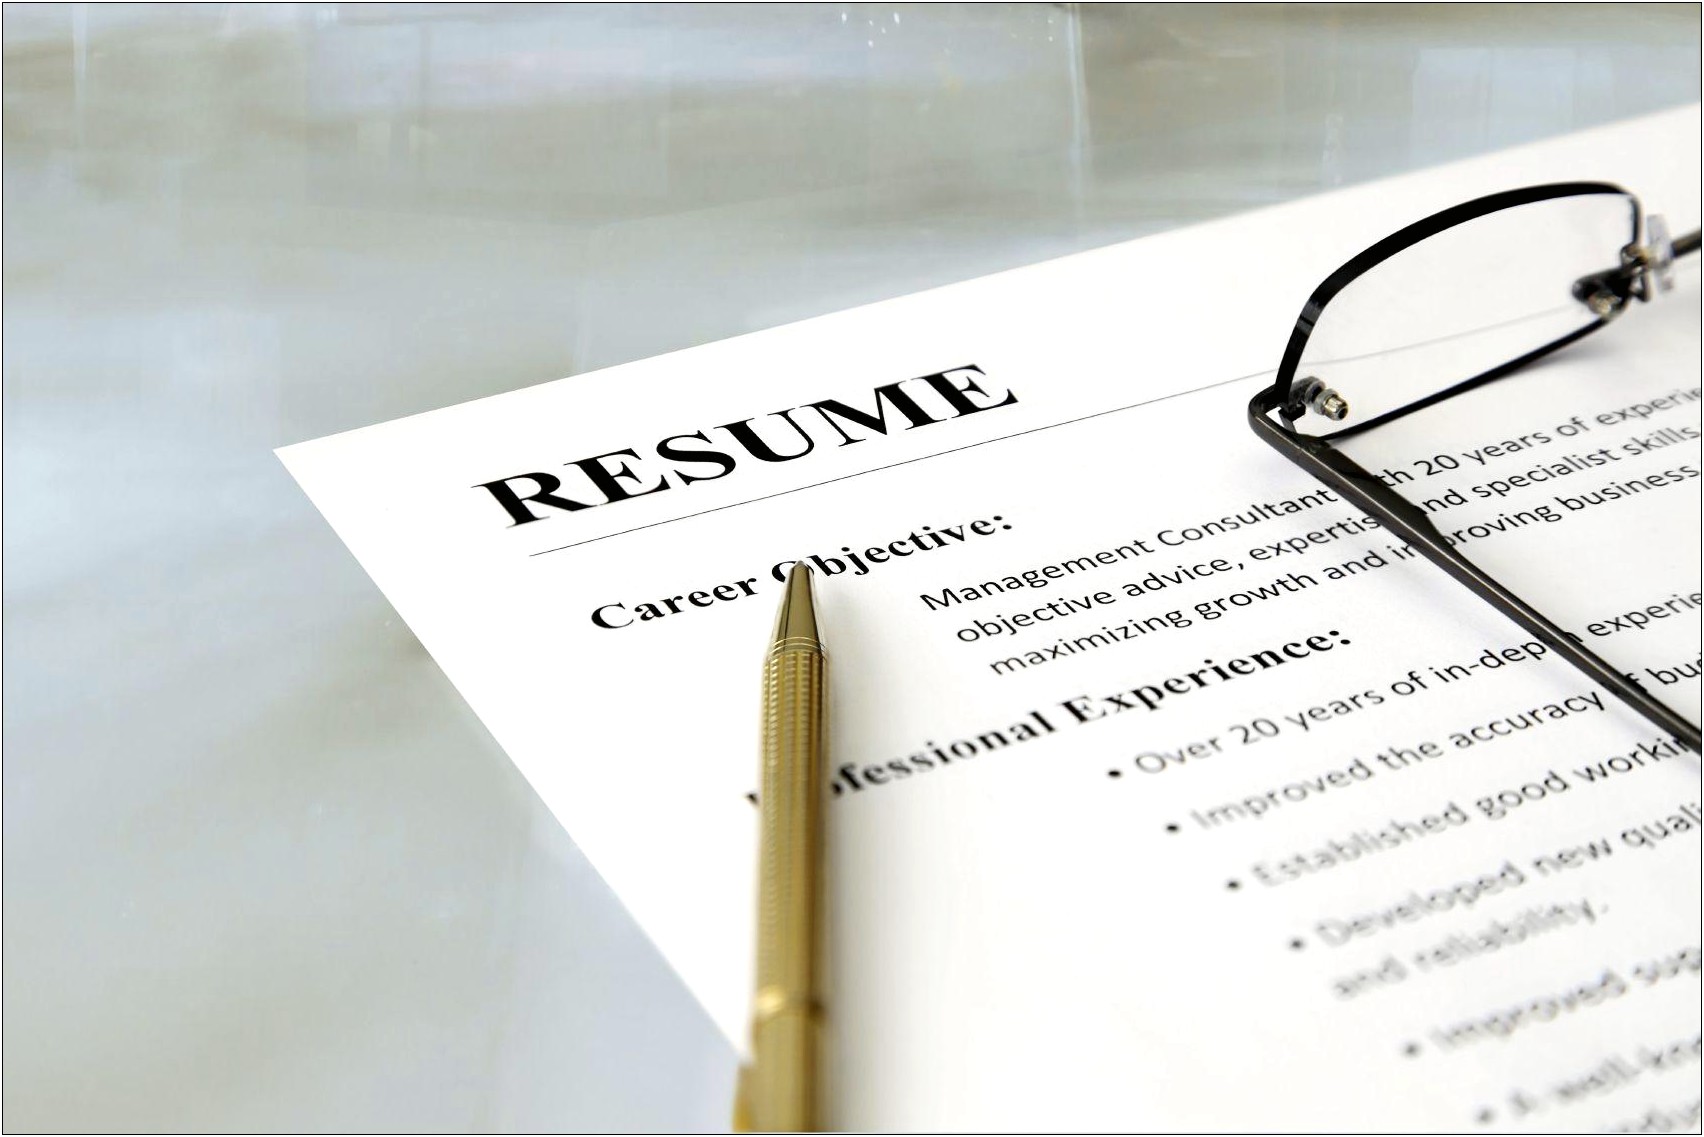 Example Of Good Resume Objective Statement